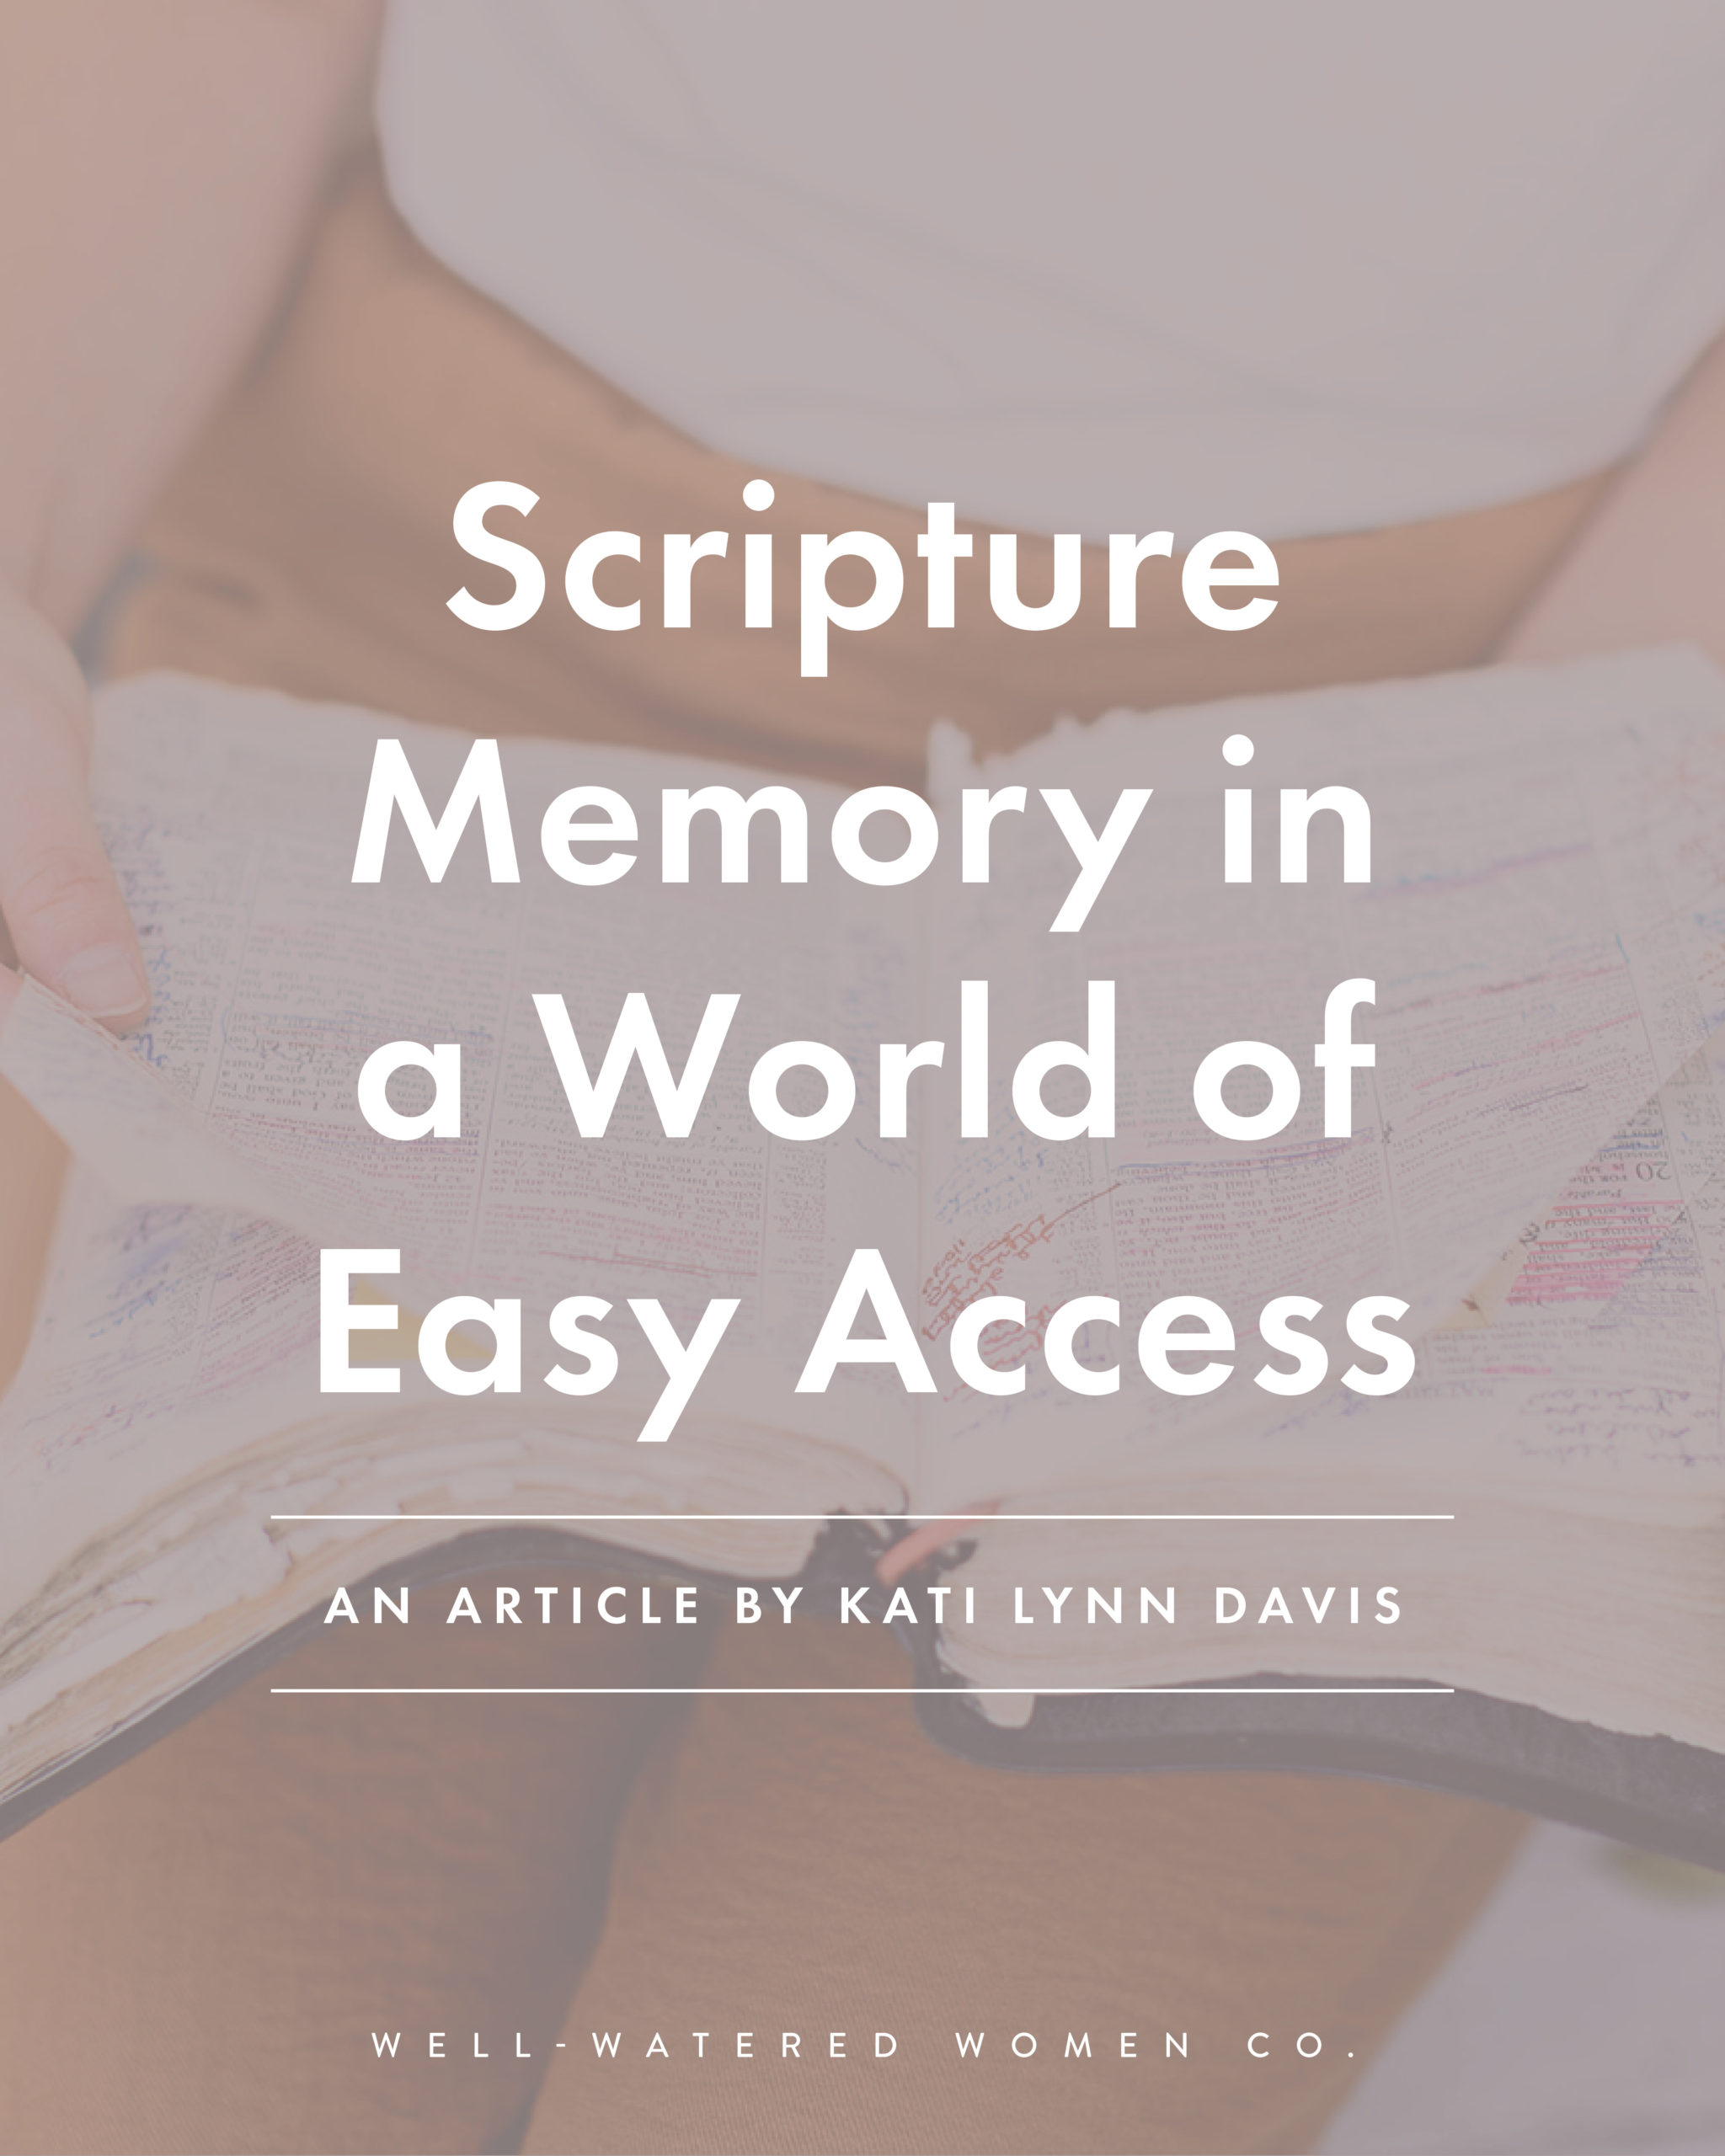 Scripture Memory in a World of Easy Access - an article from Well-Watered Women